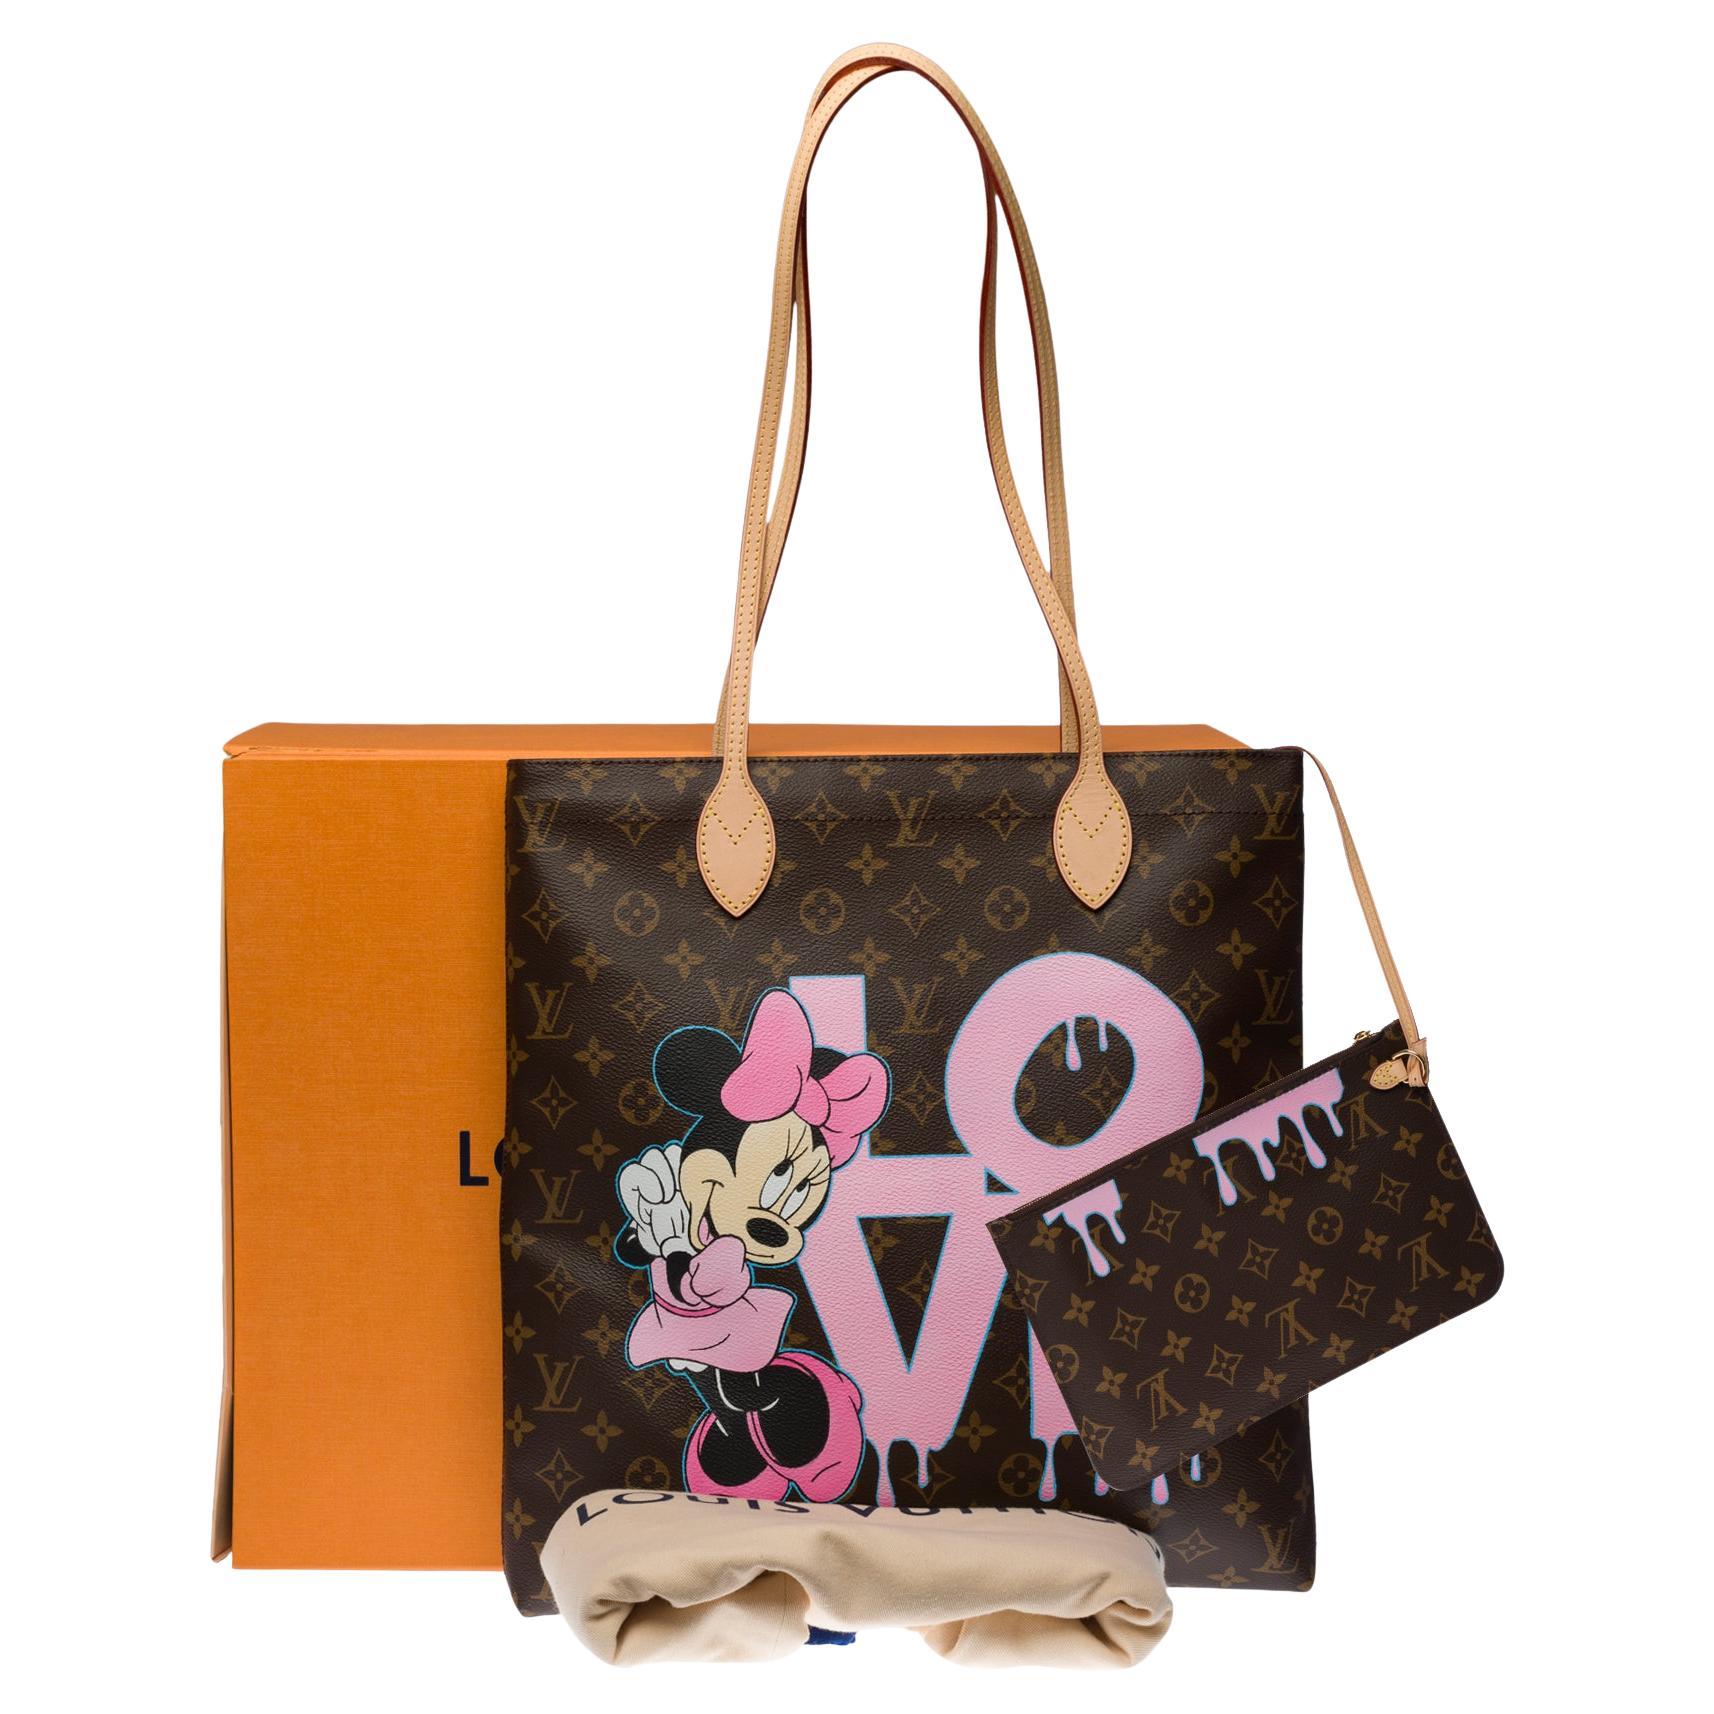 Customized Louis Vuitton Plat Moody Minnie Tote bag in brown